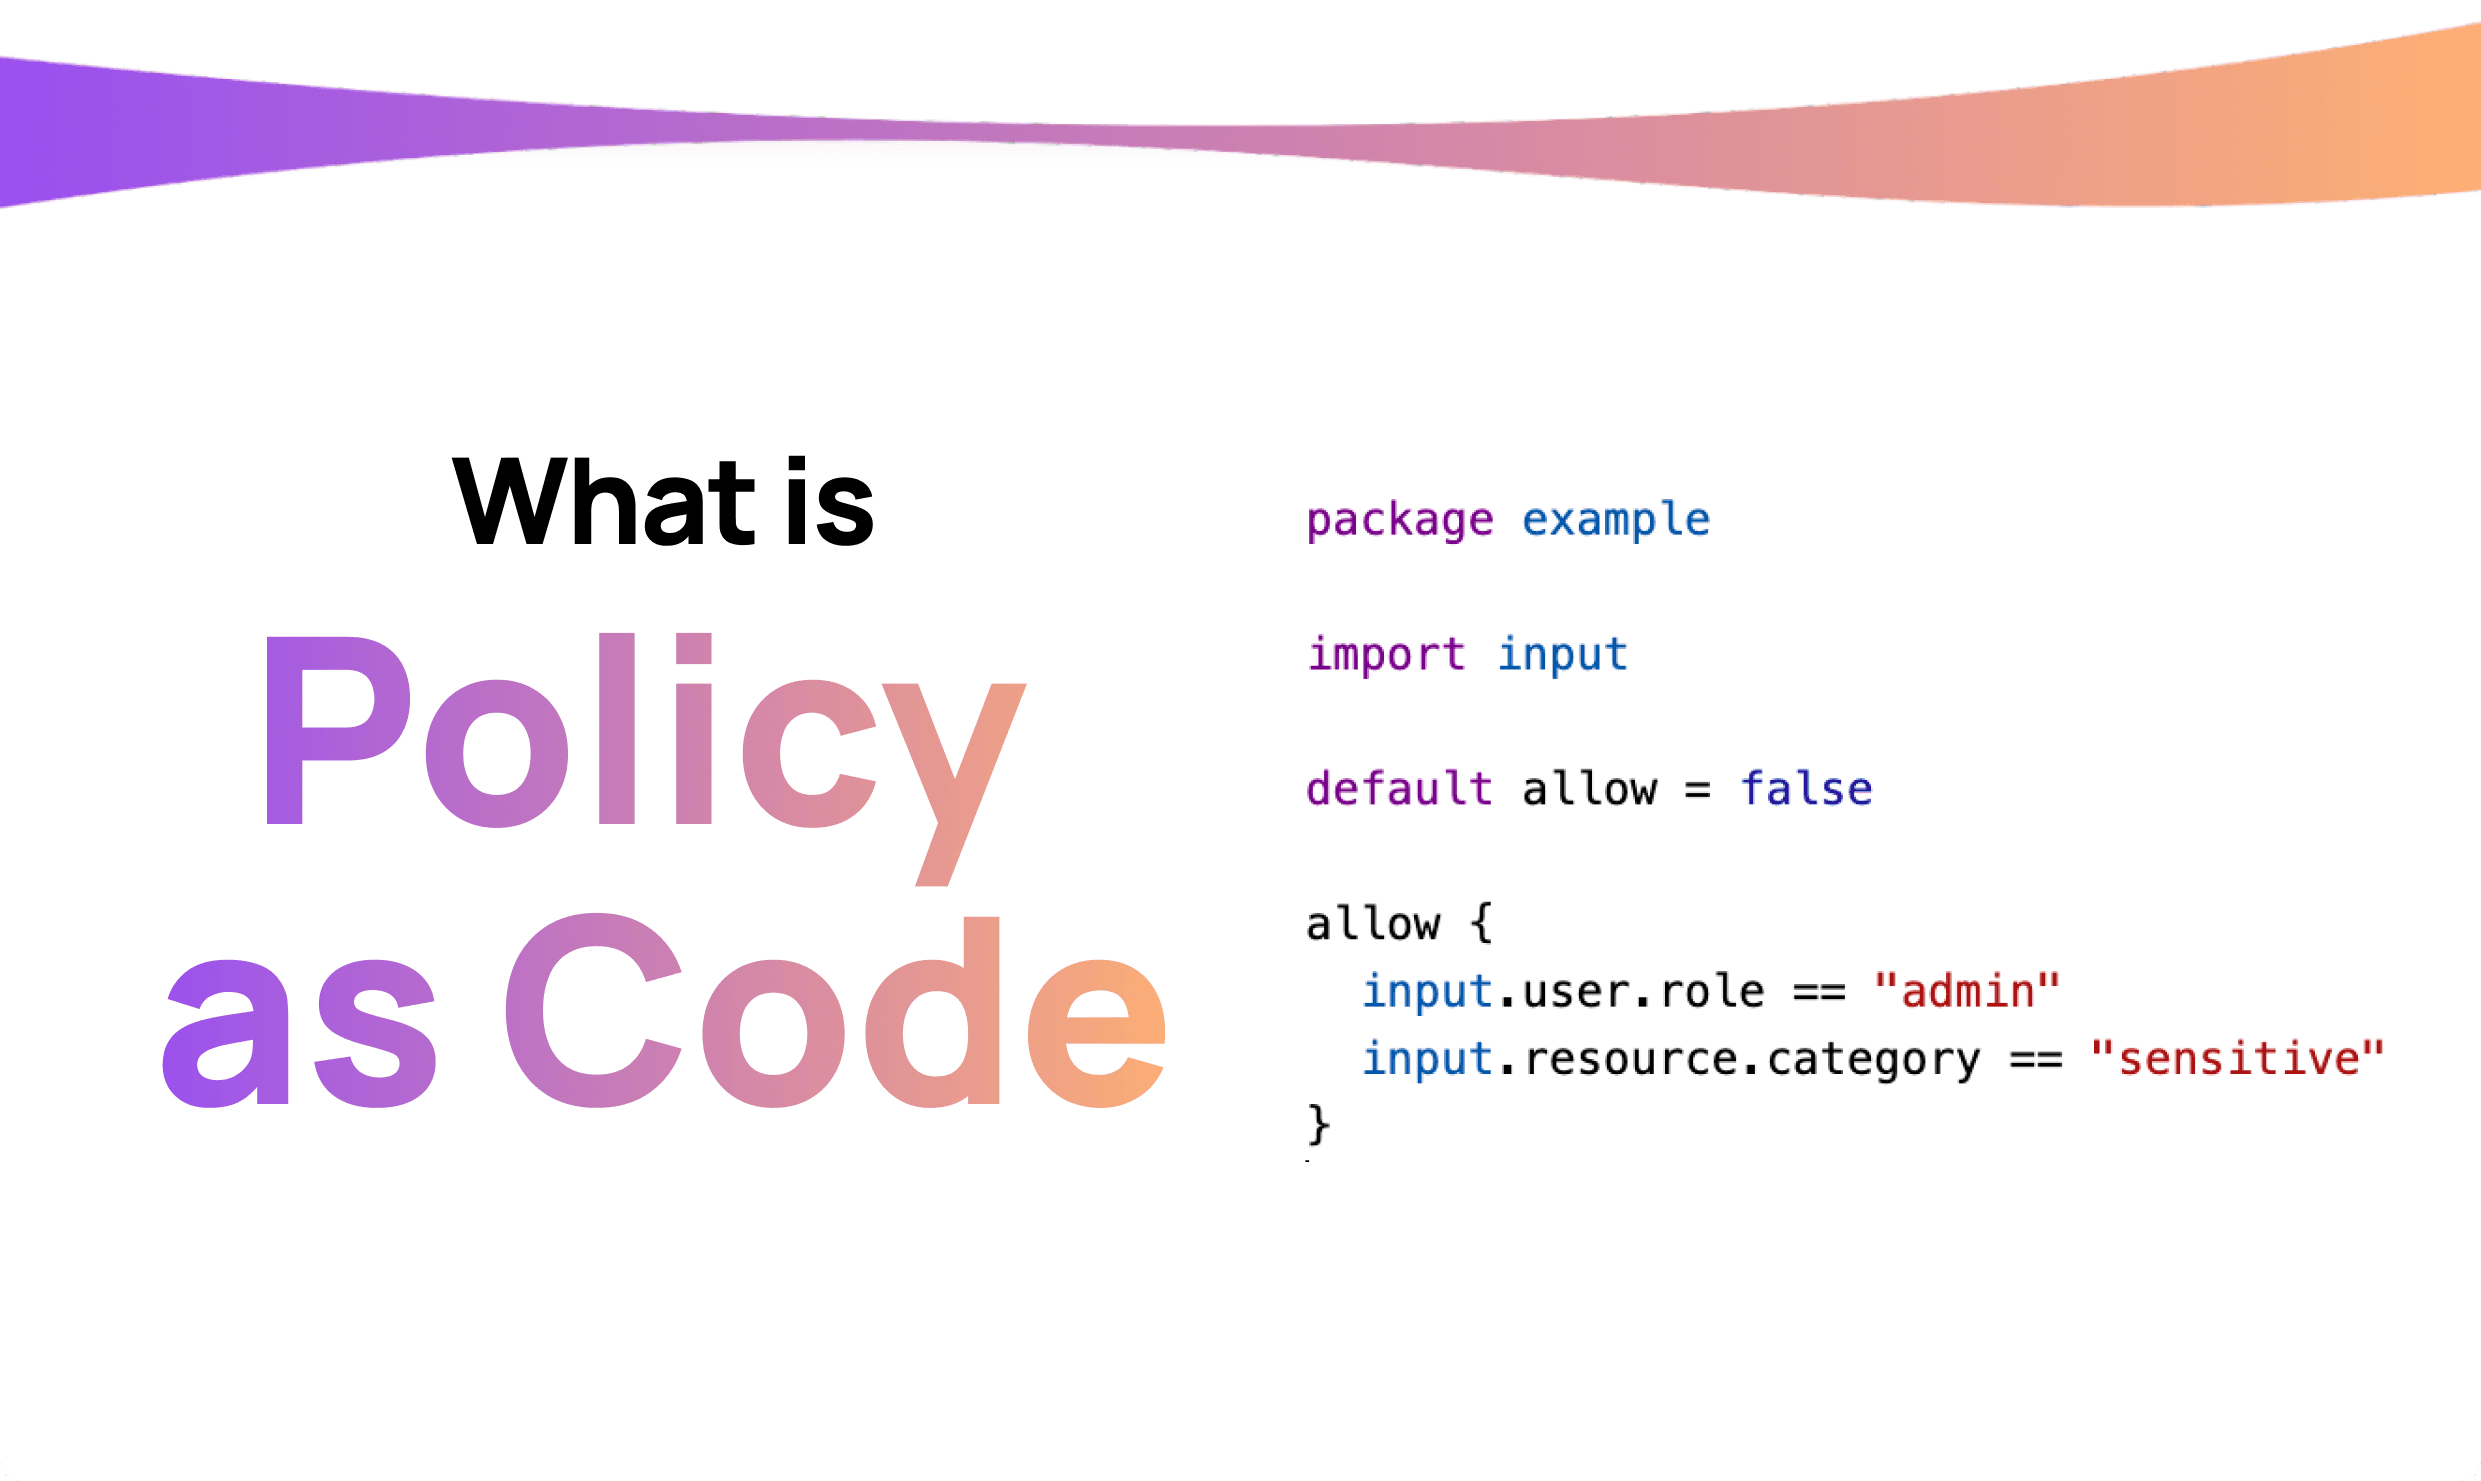 What is Policy as Code?